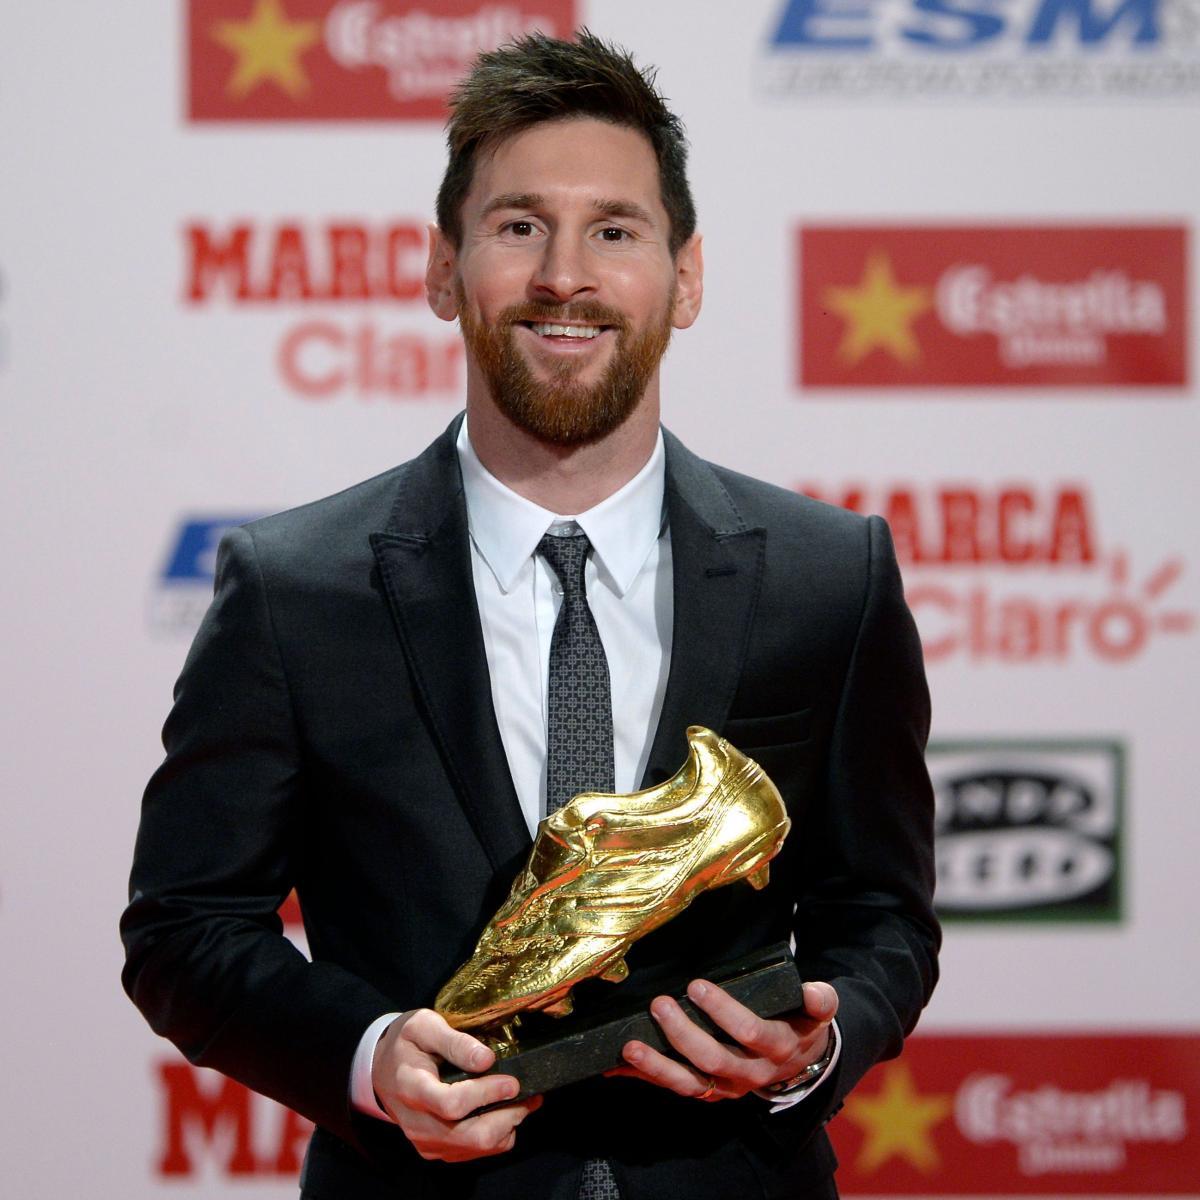 Lionel Messi Awarded 4th European Golden Shoe, Ties Cristiano